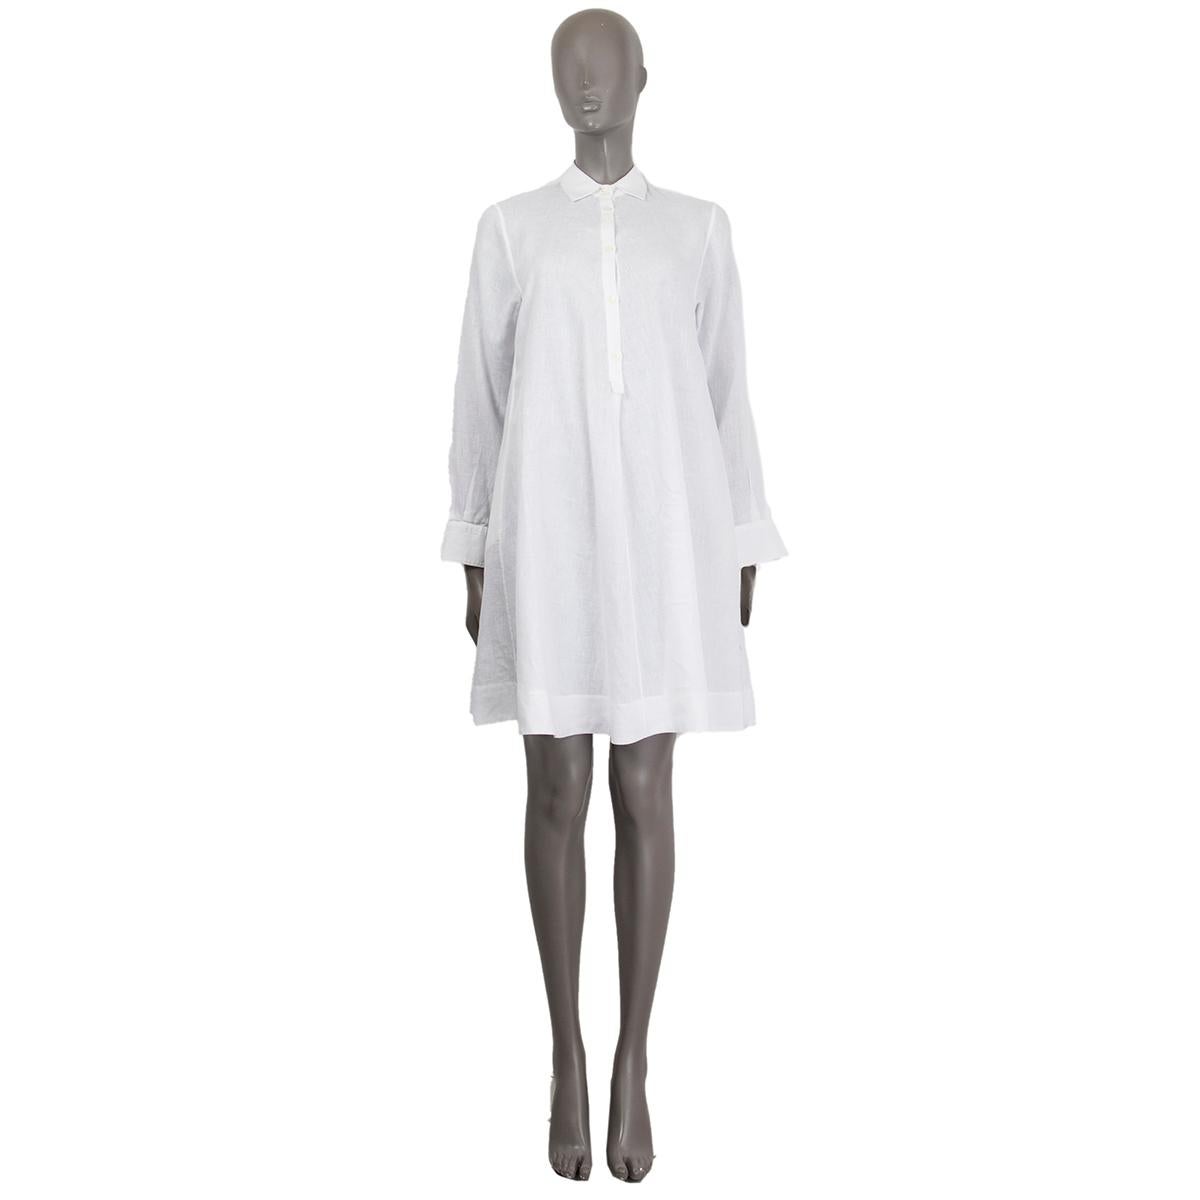 100% authentic Loro Piana long sleeve shirt dress in white linen (100%) with a flat collar and pockets. Closes on the front with buttons. Unlined. Has been worn and is in excellent condition. 

Measurements
Tag Size	(Missing Tag) L
Size	L
Shoulder